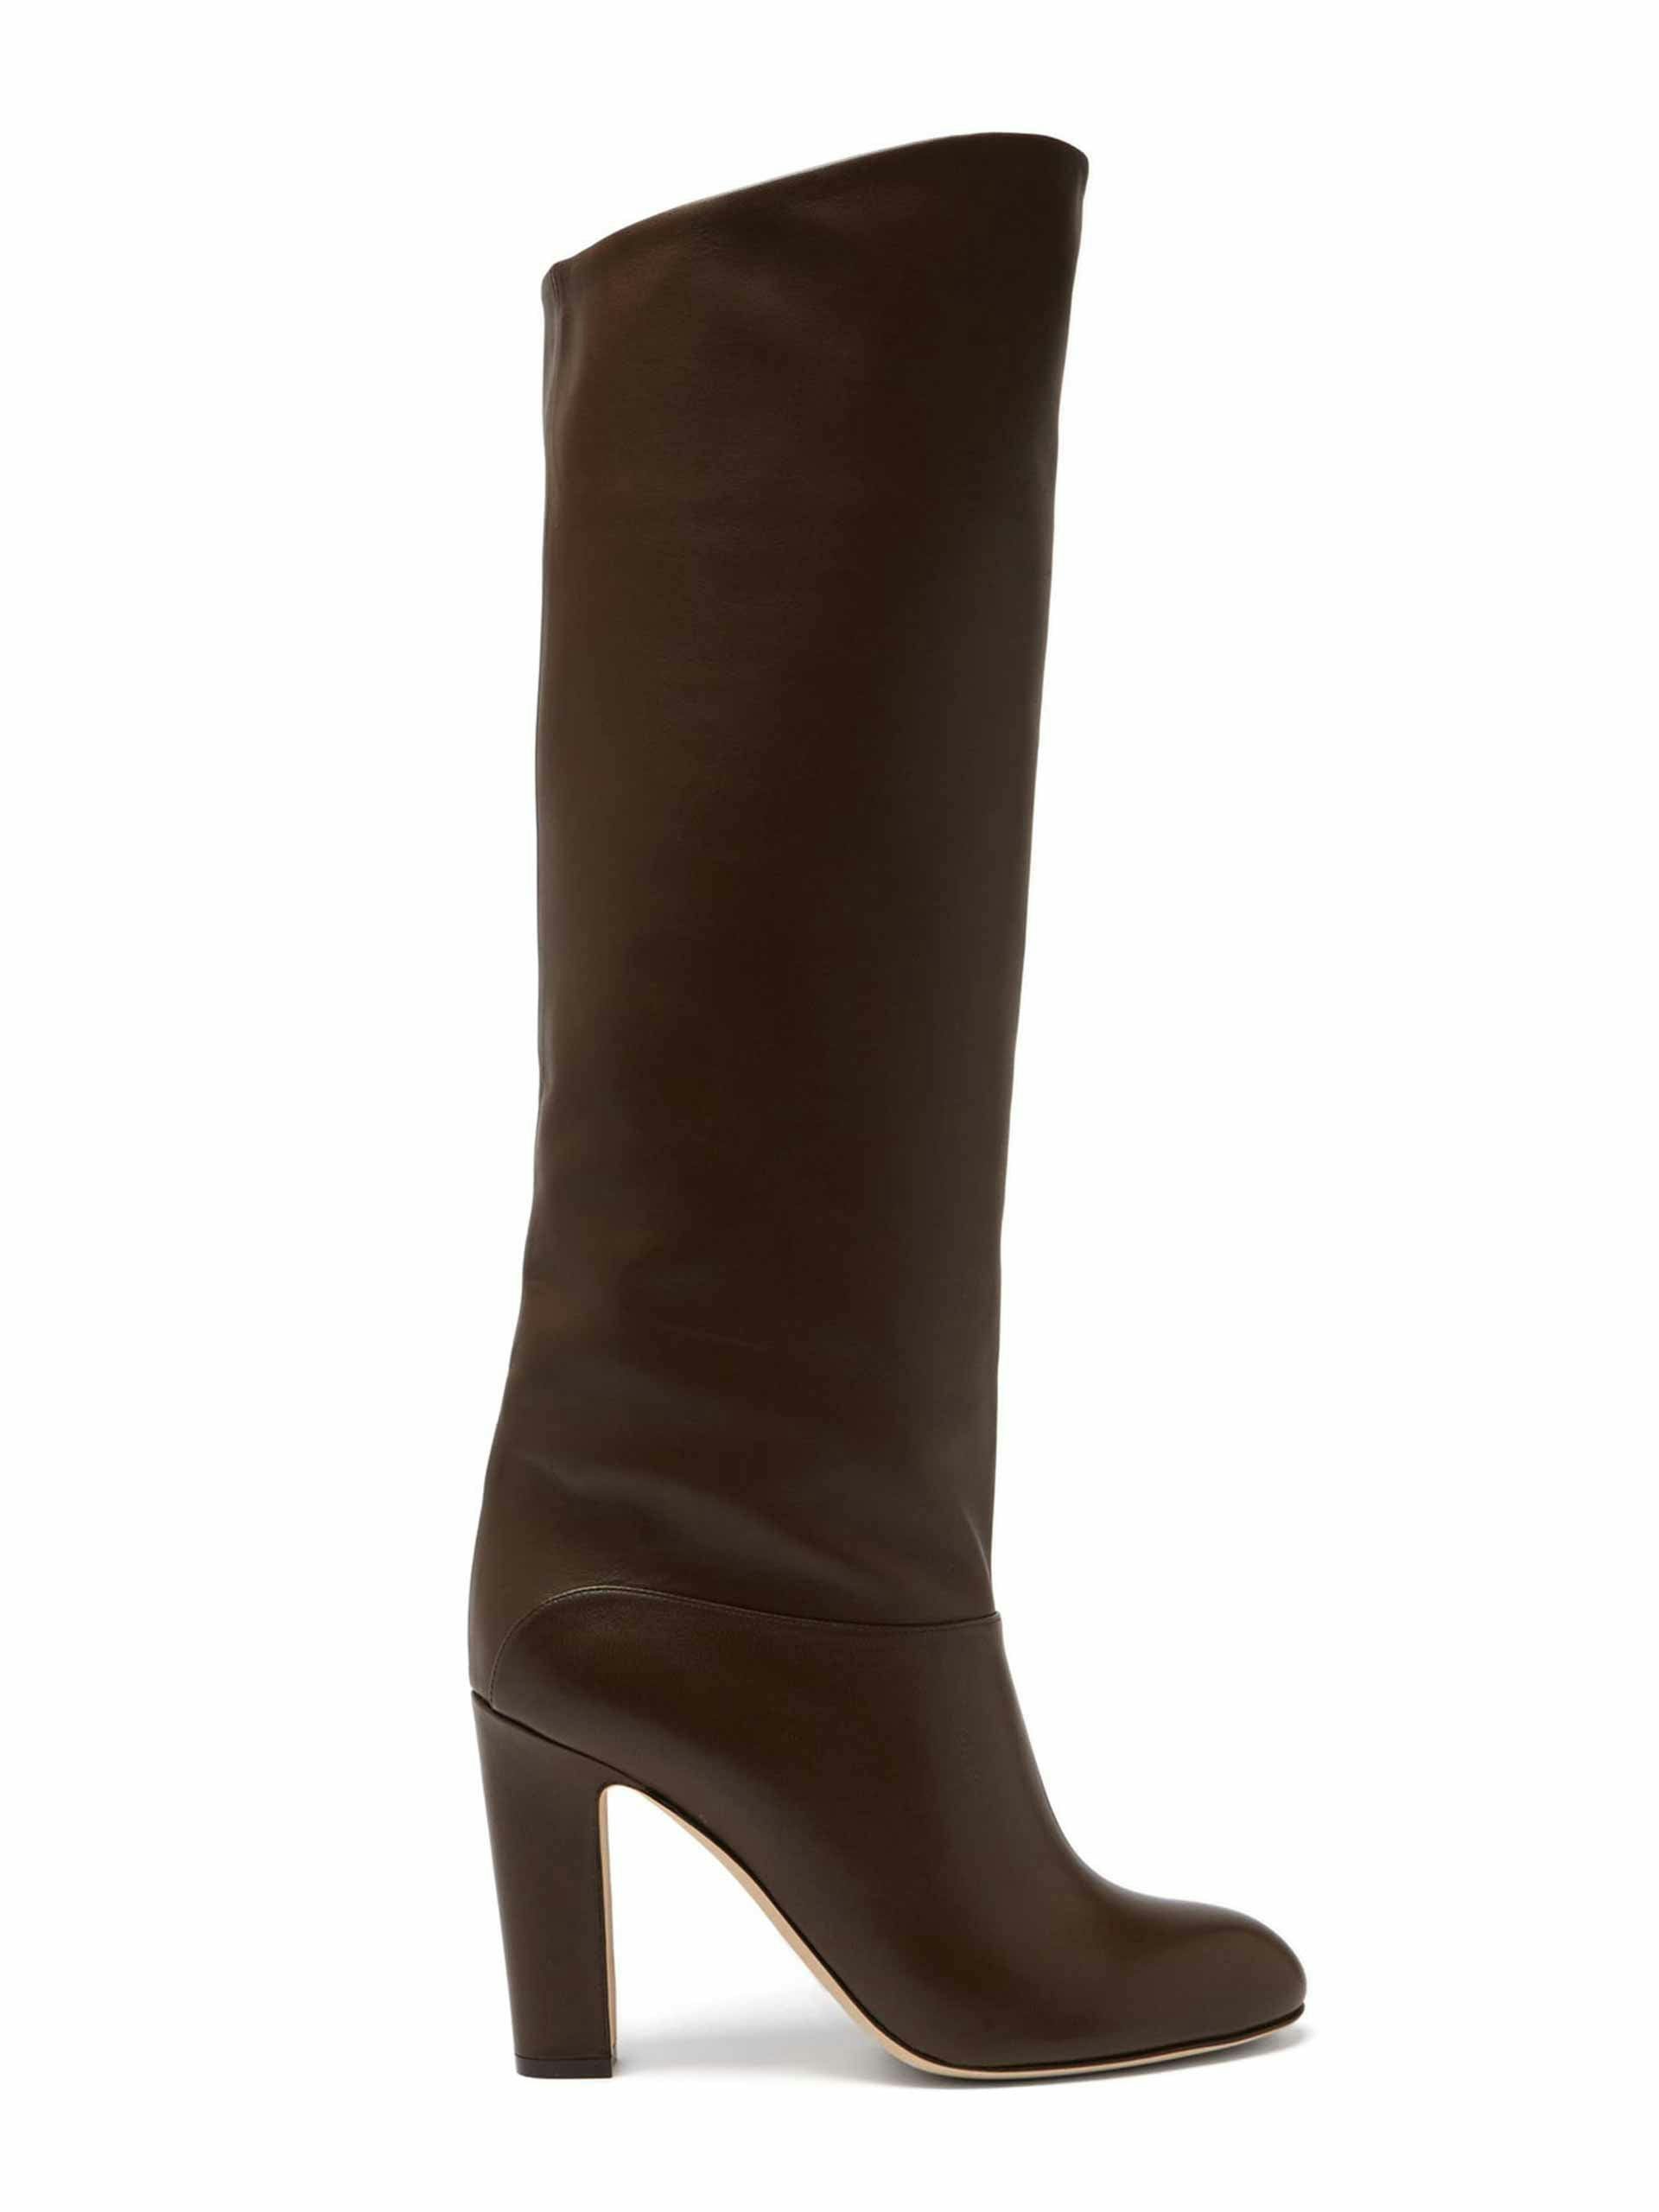 Brown leather knee high boots